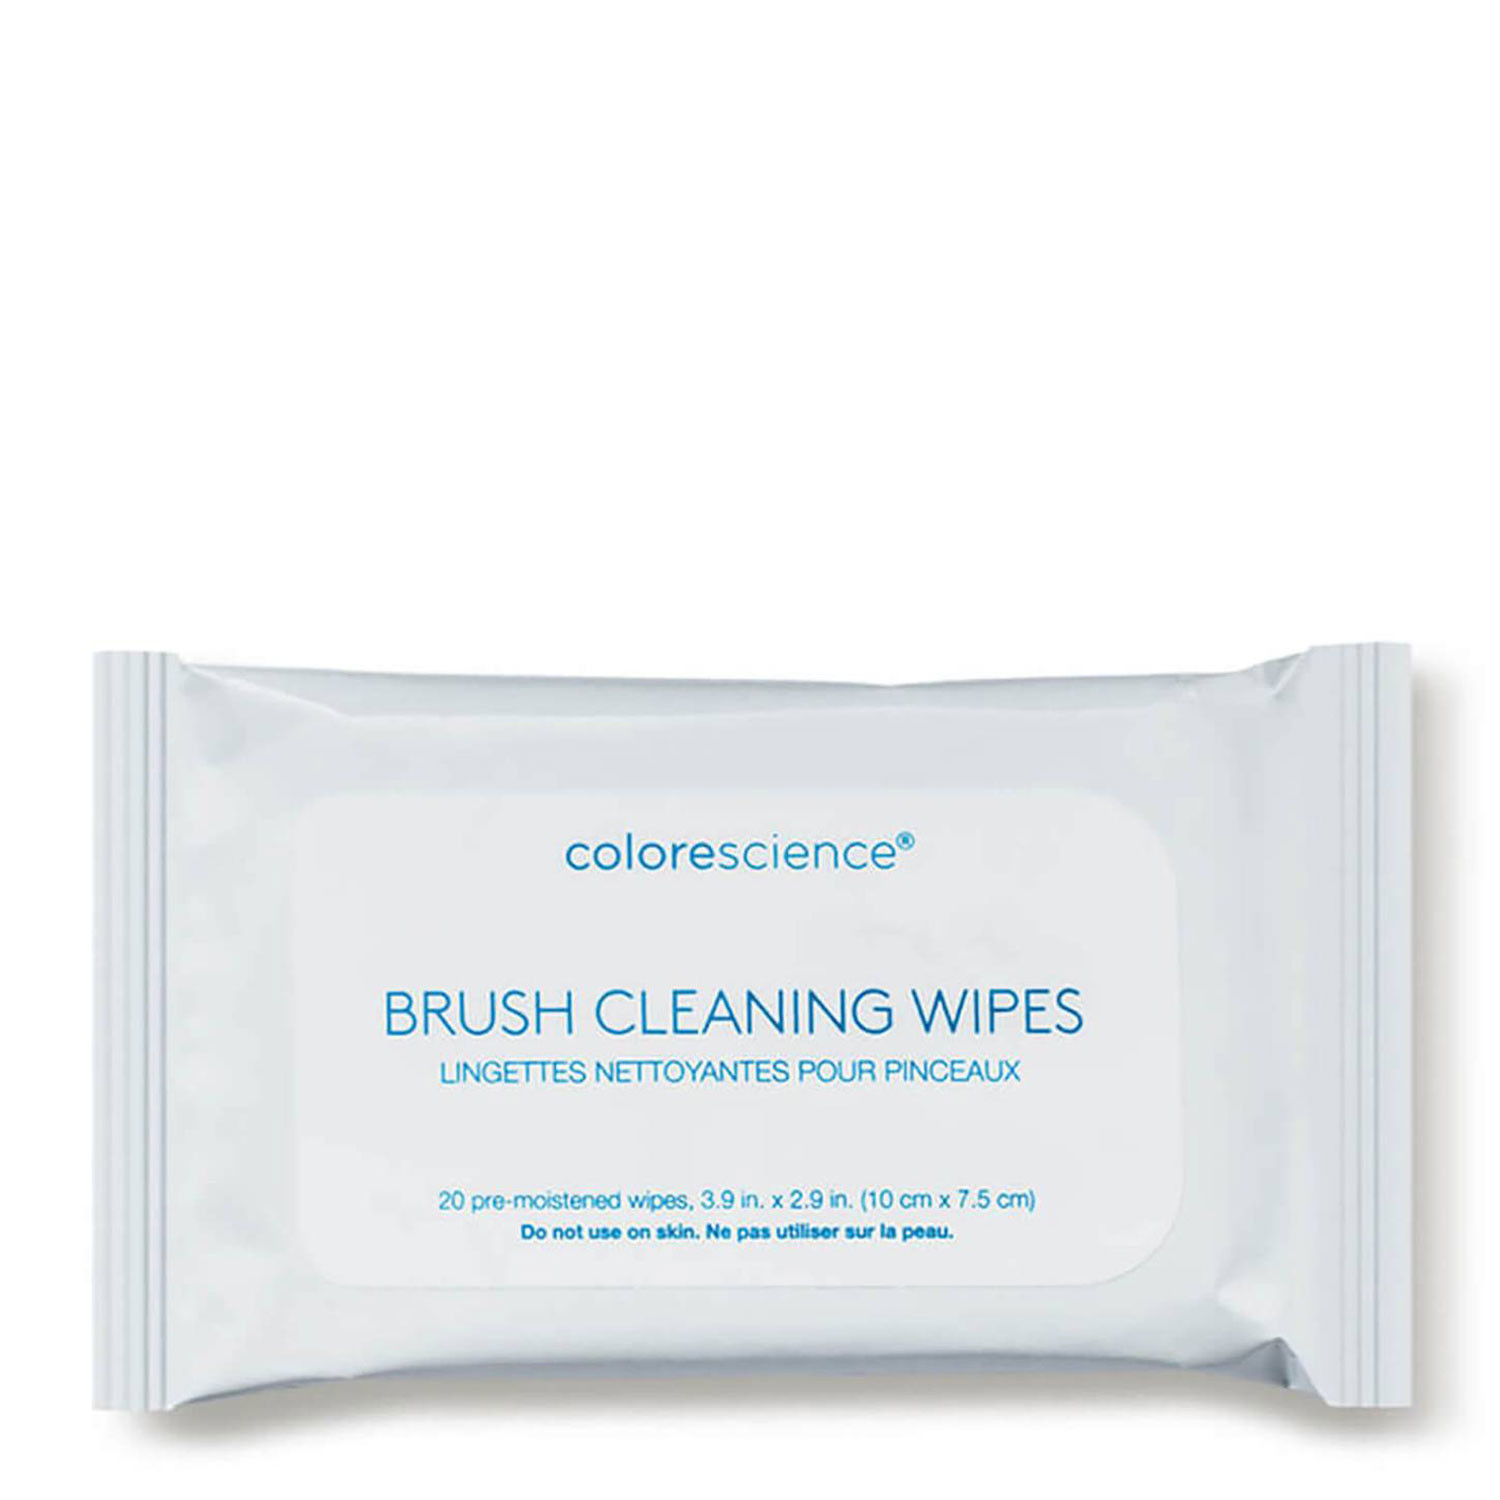 colorescience brush cleaning wipes